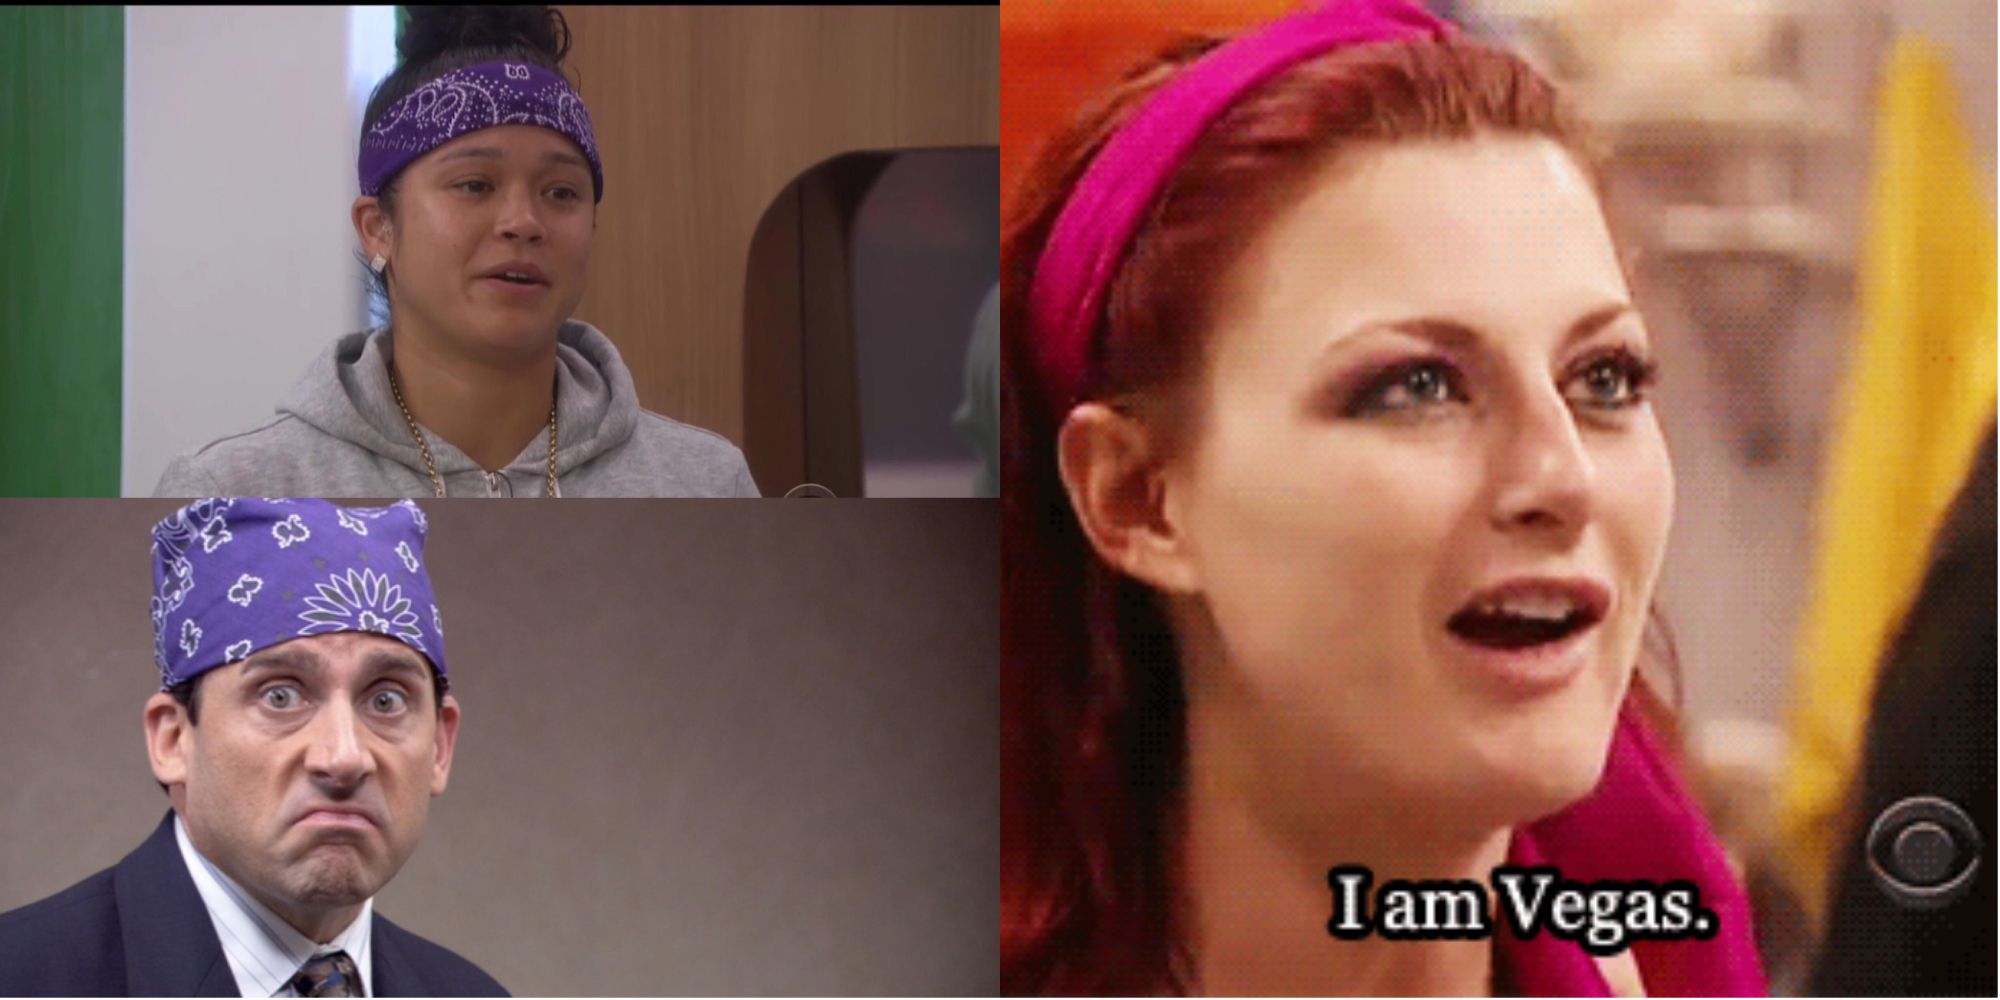 Memes about former Big Brother winners Kayce and Rachel